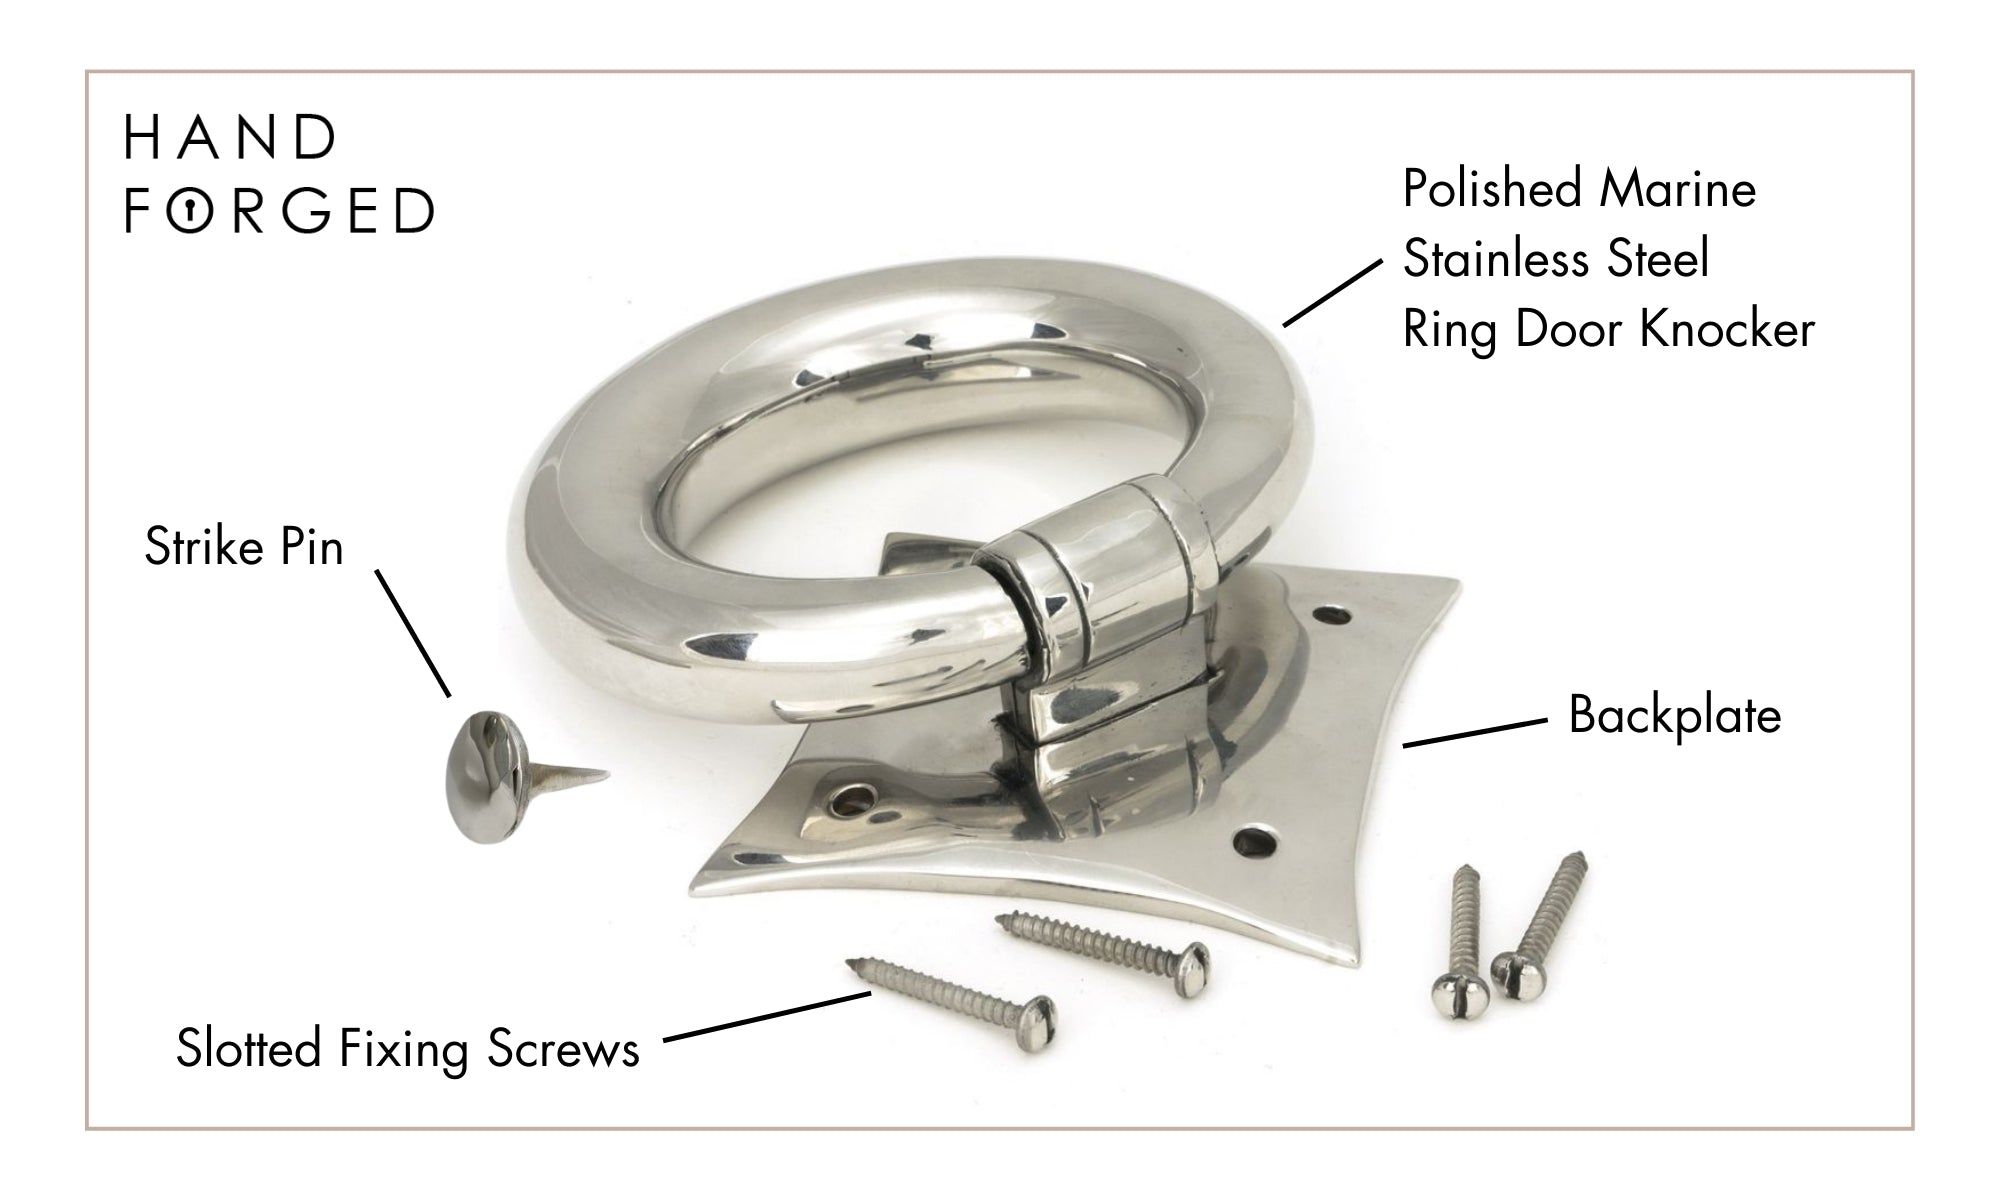 Diagram of a Polished Marine Stainless Steel Ring door knocker with labels pointing to the strike pin, fixing screws, door knocker and backplate.